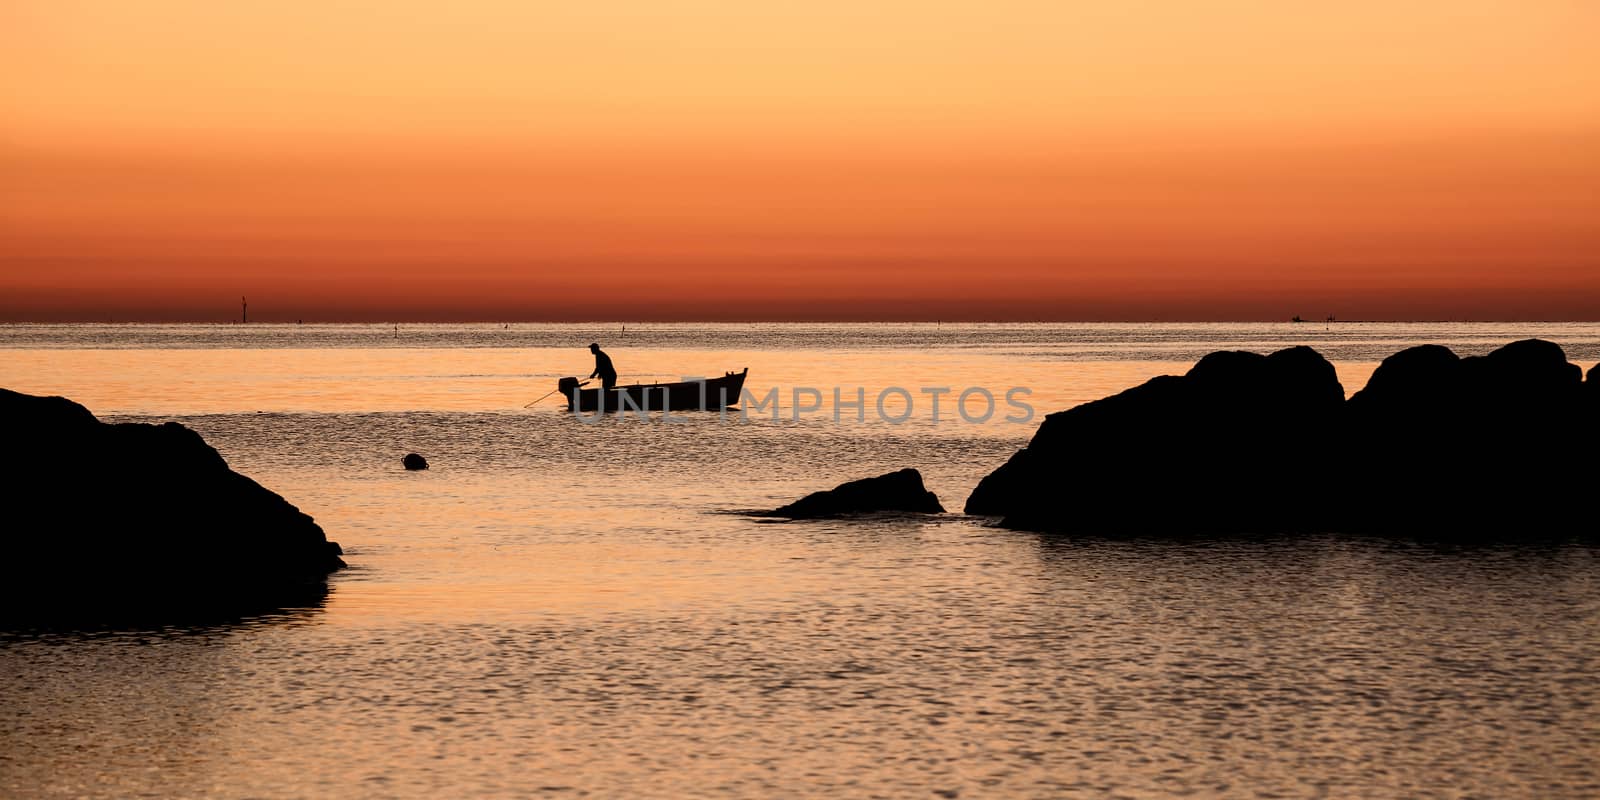 Fisherman in the early morning dawn waiting to get back into the boat to its network